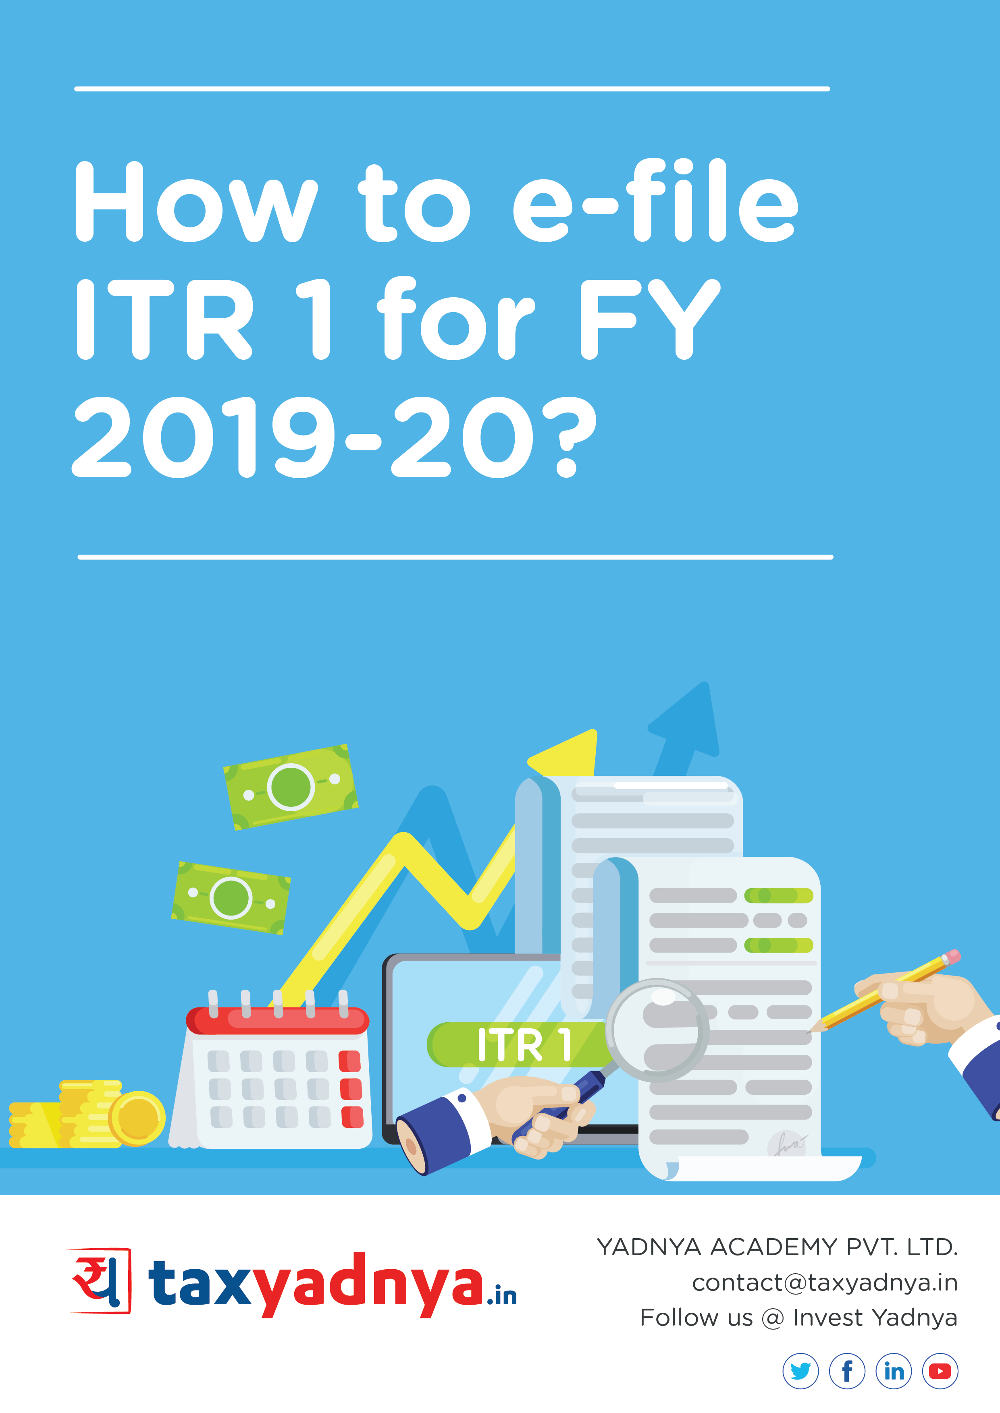 This e-book contains a guide as to how to file income tax return using ITR1 form for FY 2019-20. This self-help guide helps in complete ITR1 filing process through the income tax website. ✔ Detailed Research ✔ Quality Reports